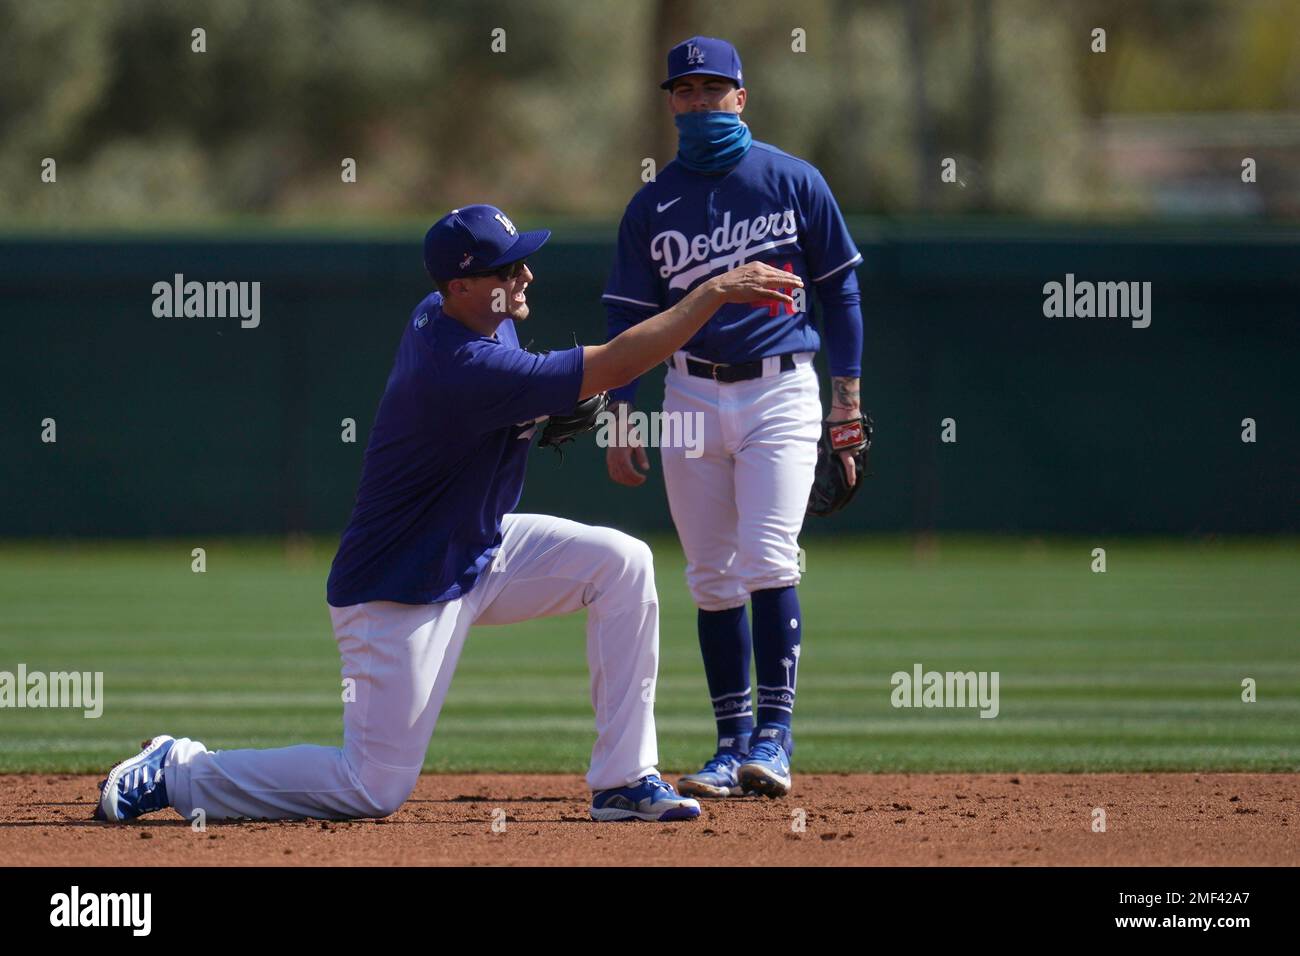 Dodgers' Corey Seager held out of workout